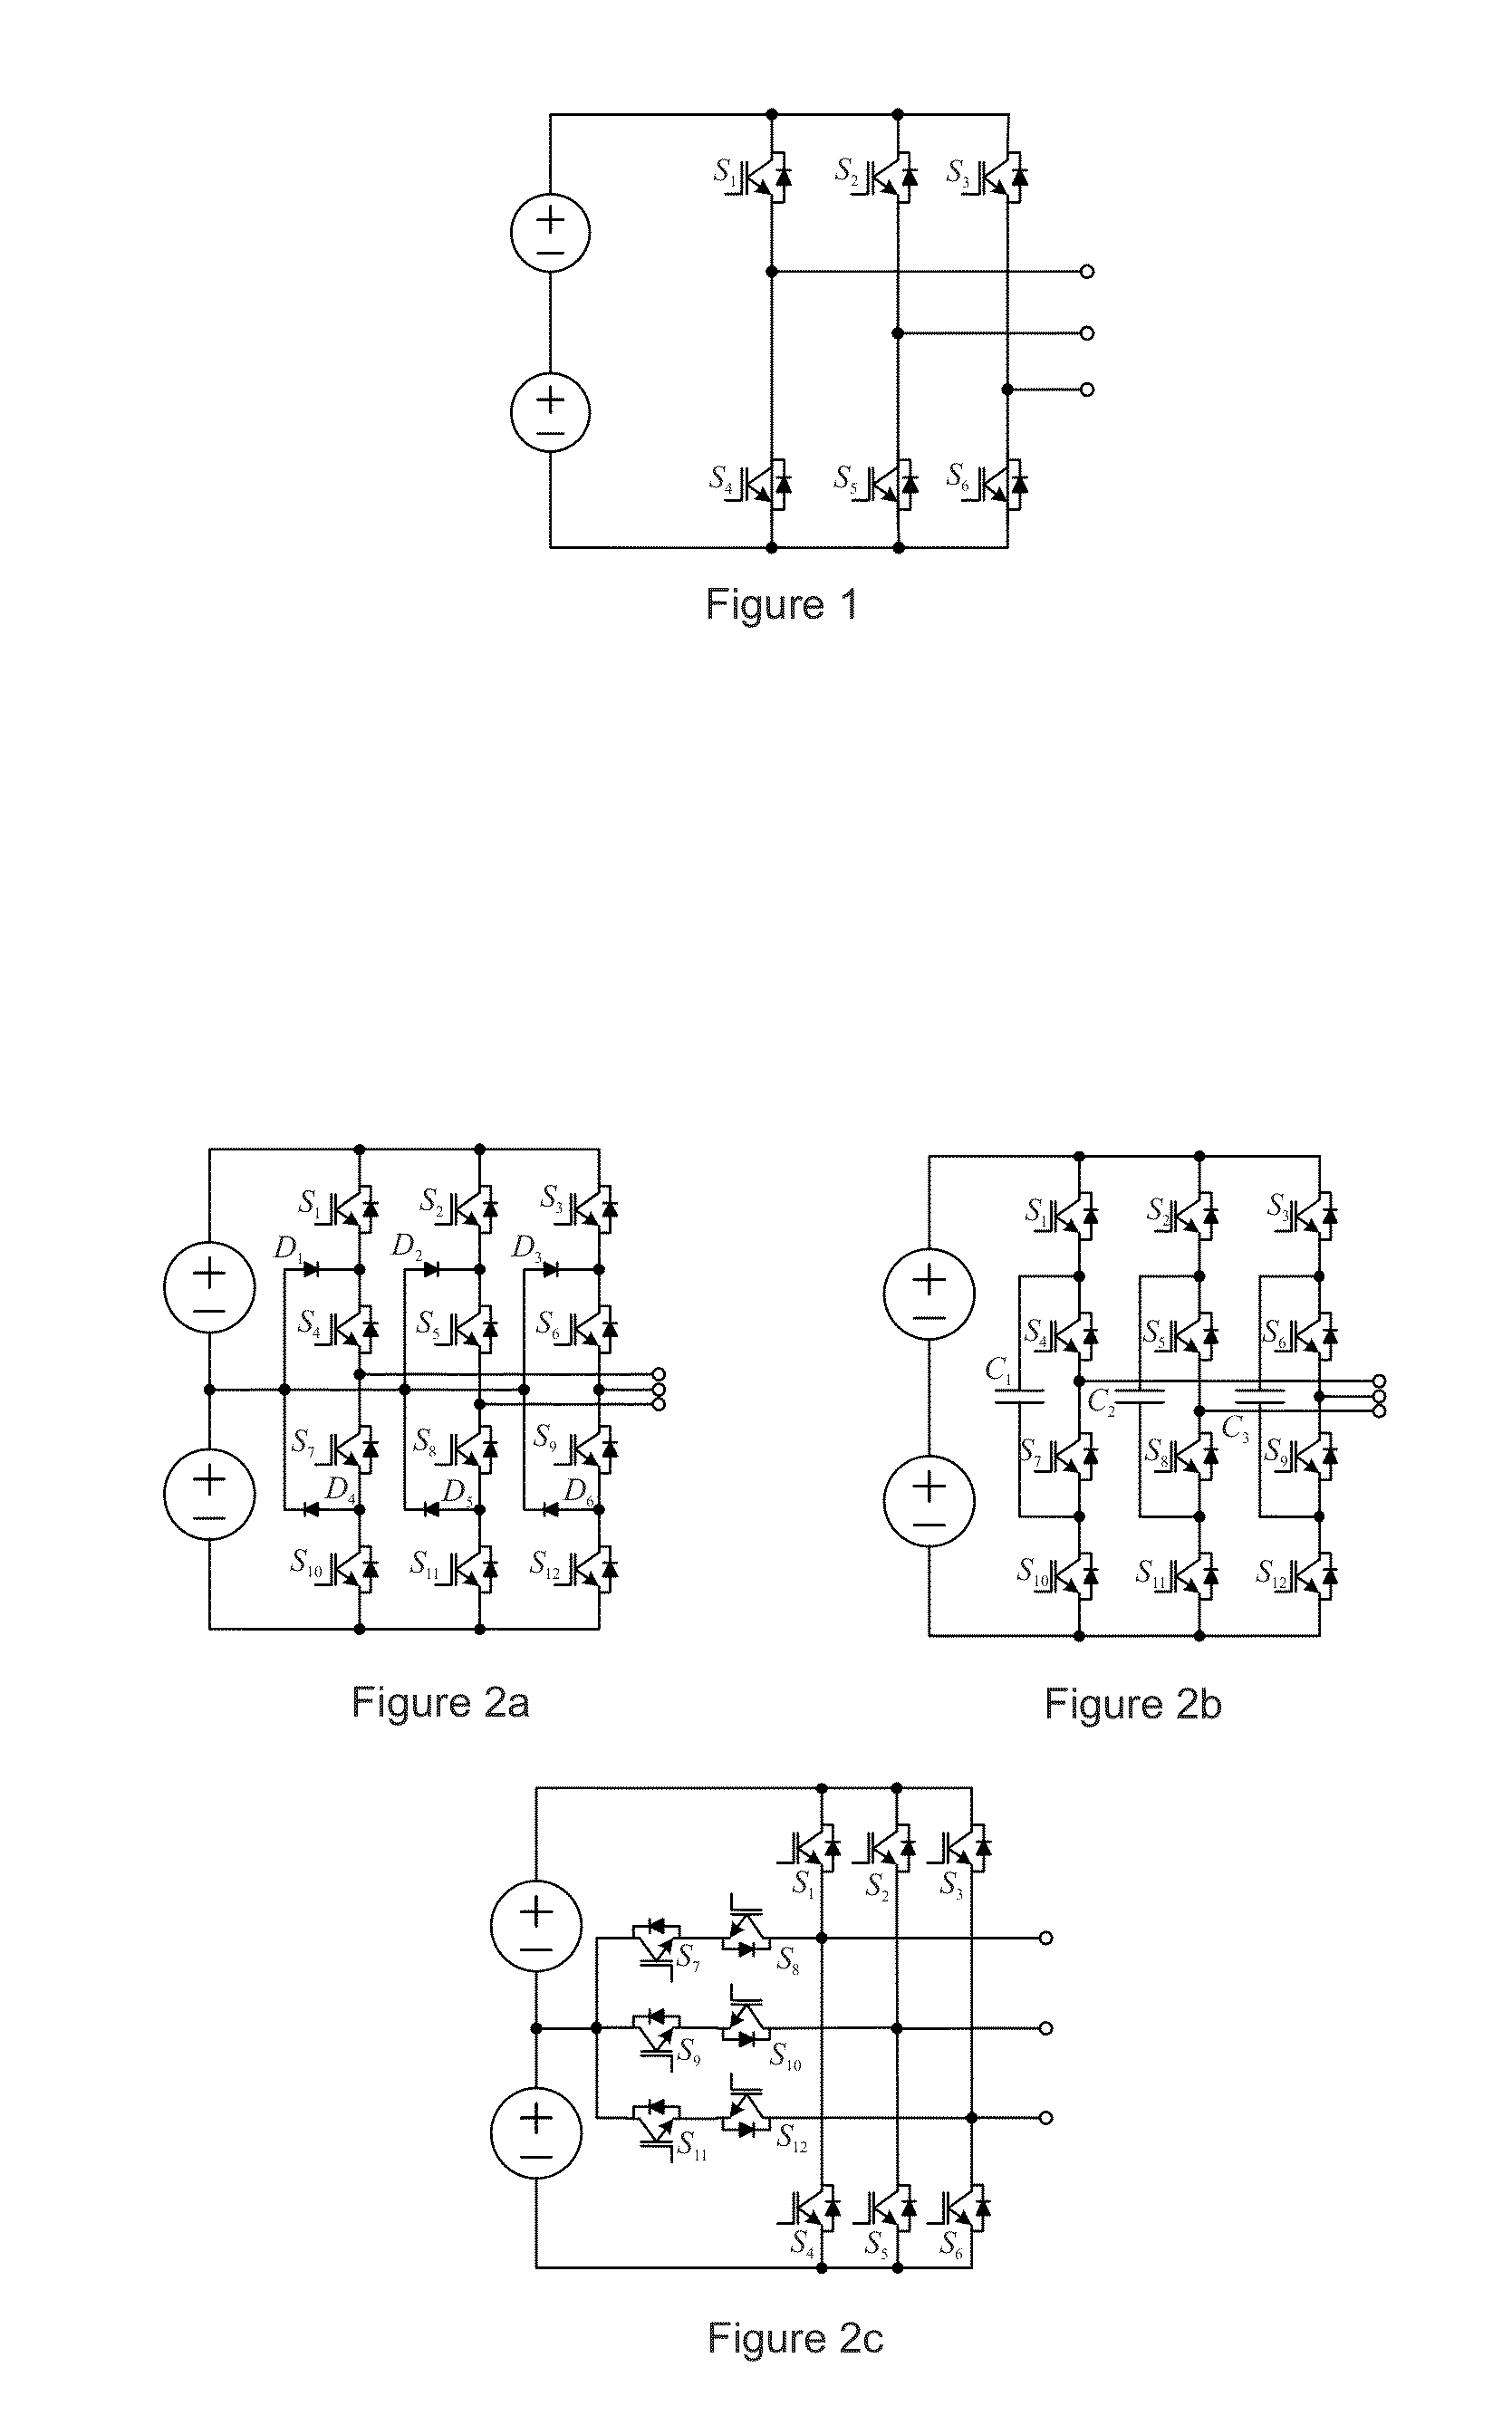 Method and apparatus for producing three-phase current